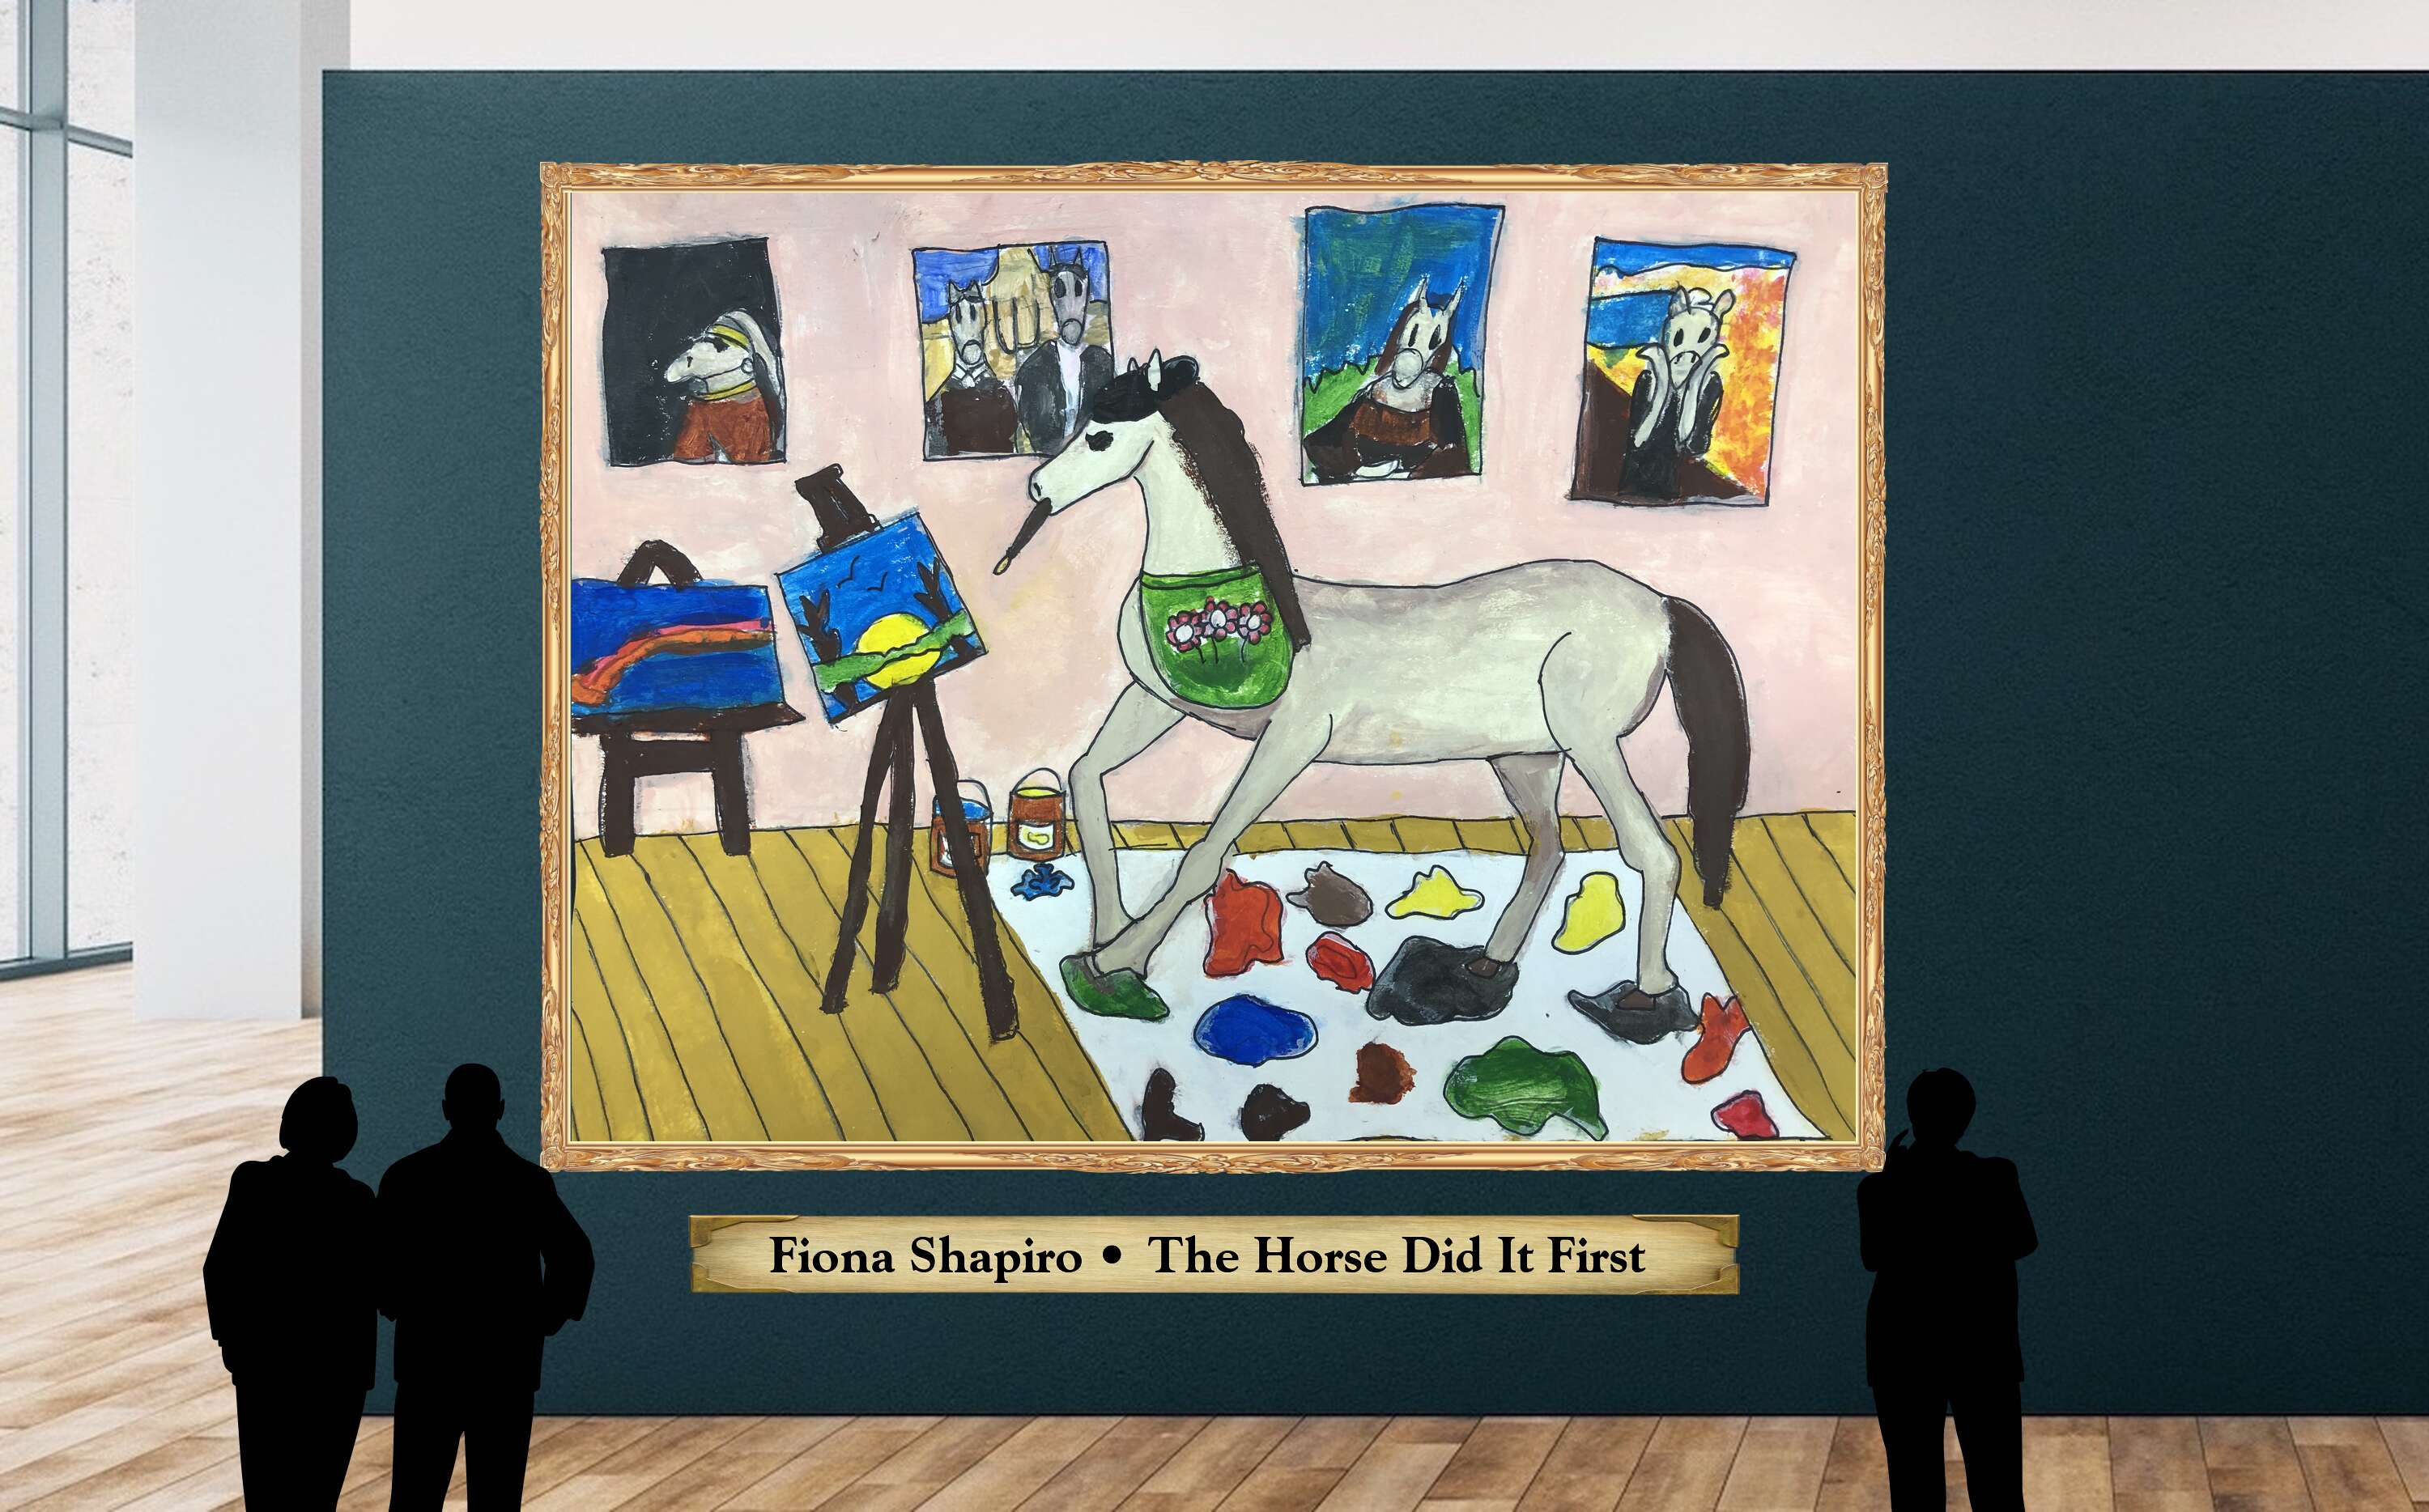 Fiona Shapiro • The Horse Did It First 